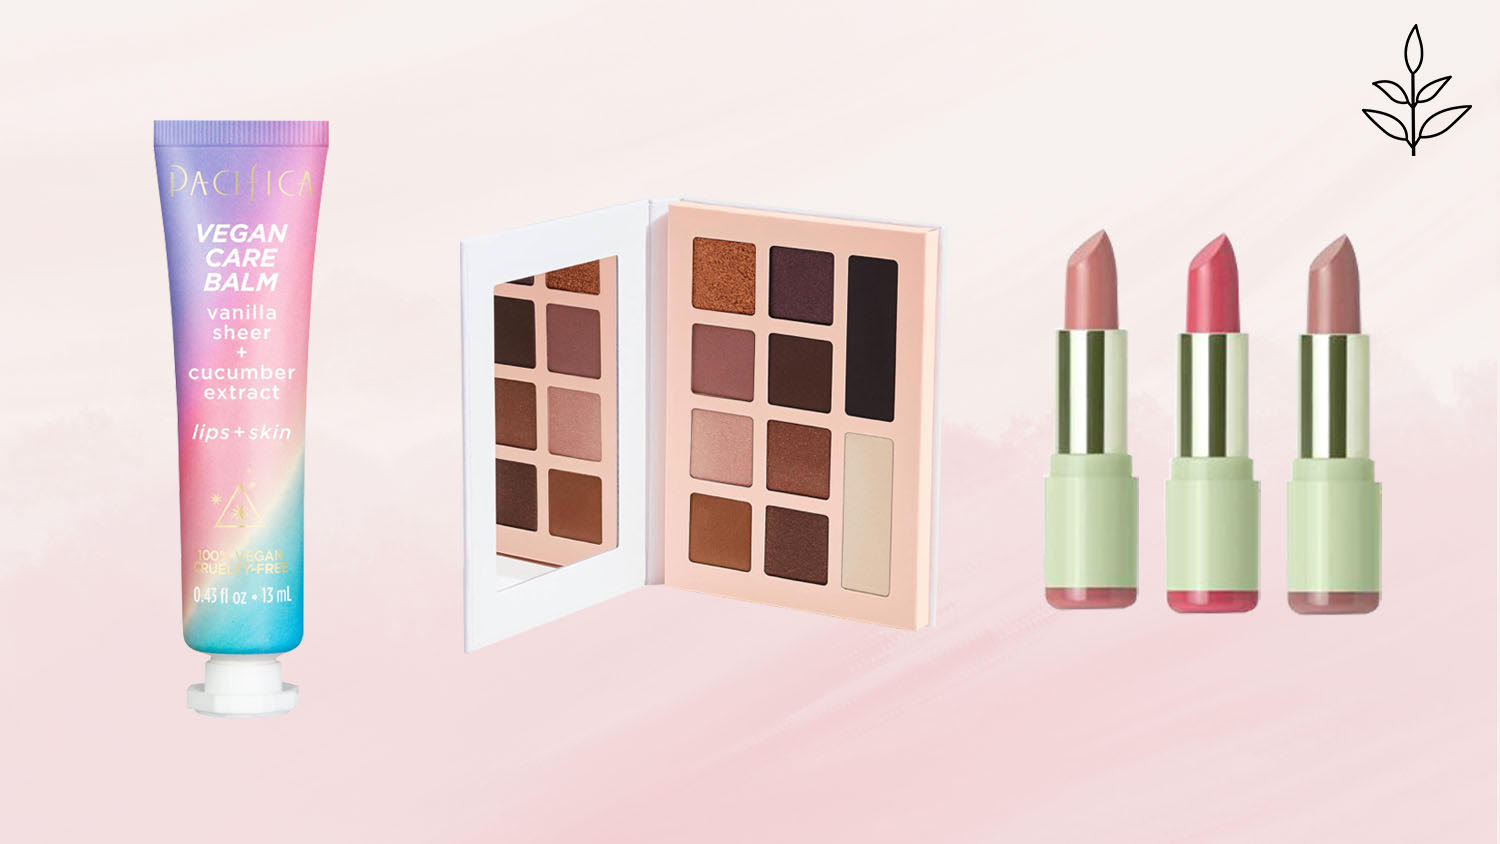 10 Vegan Makeup Items under $10 - Vegan Beauty Review, Vegan and  Cruelty-Free Beauty, Fashion, Food, and Lifestyle : Vegan Beauty Review